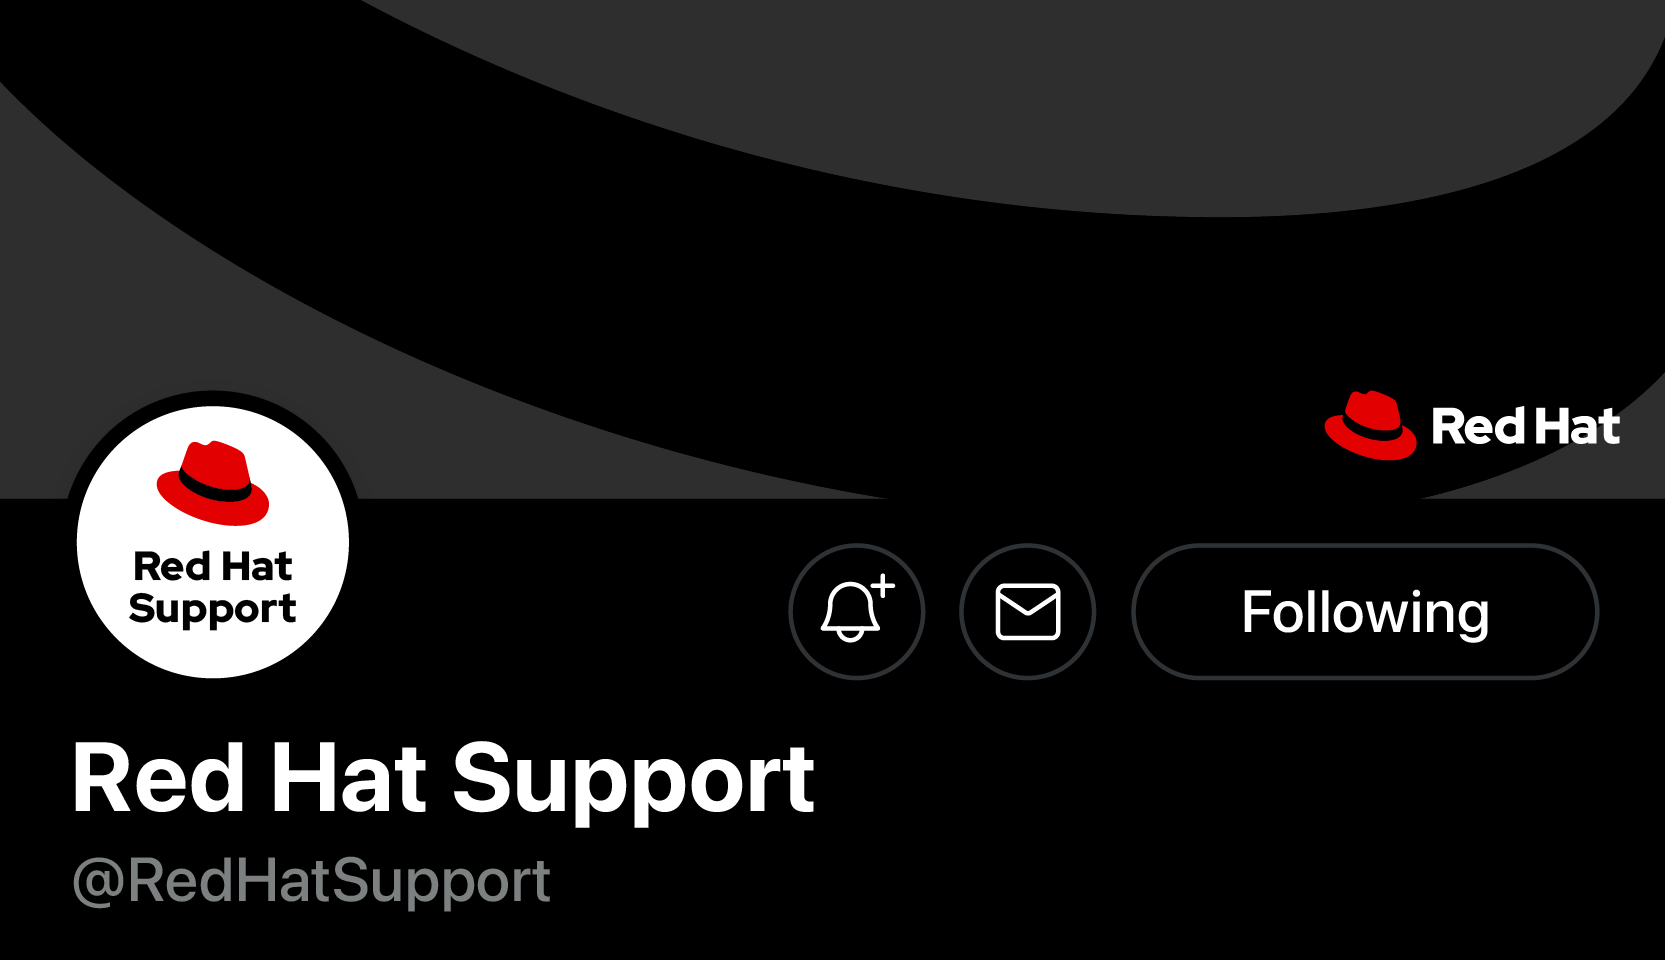 A social media page for Red Hat Support with the hat in the profile image.